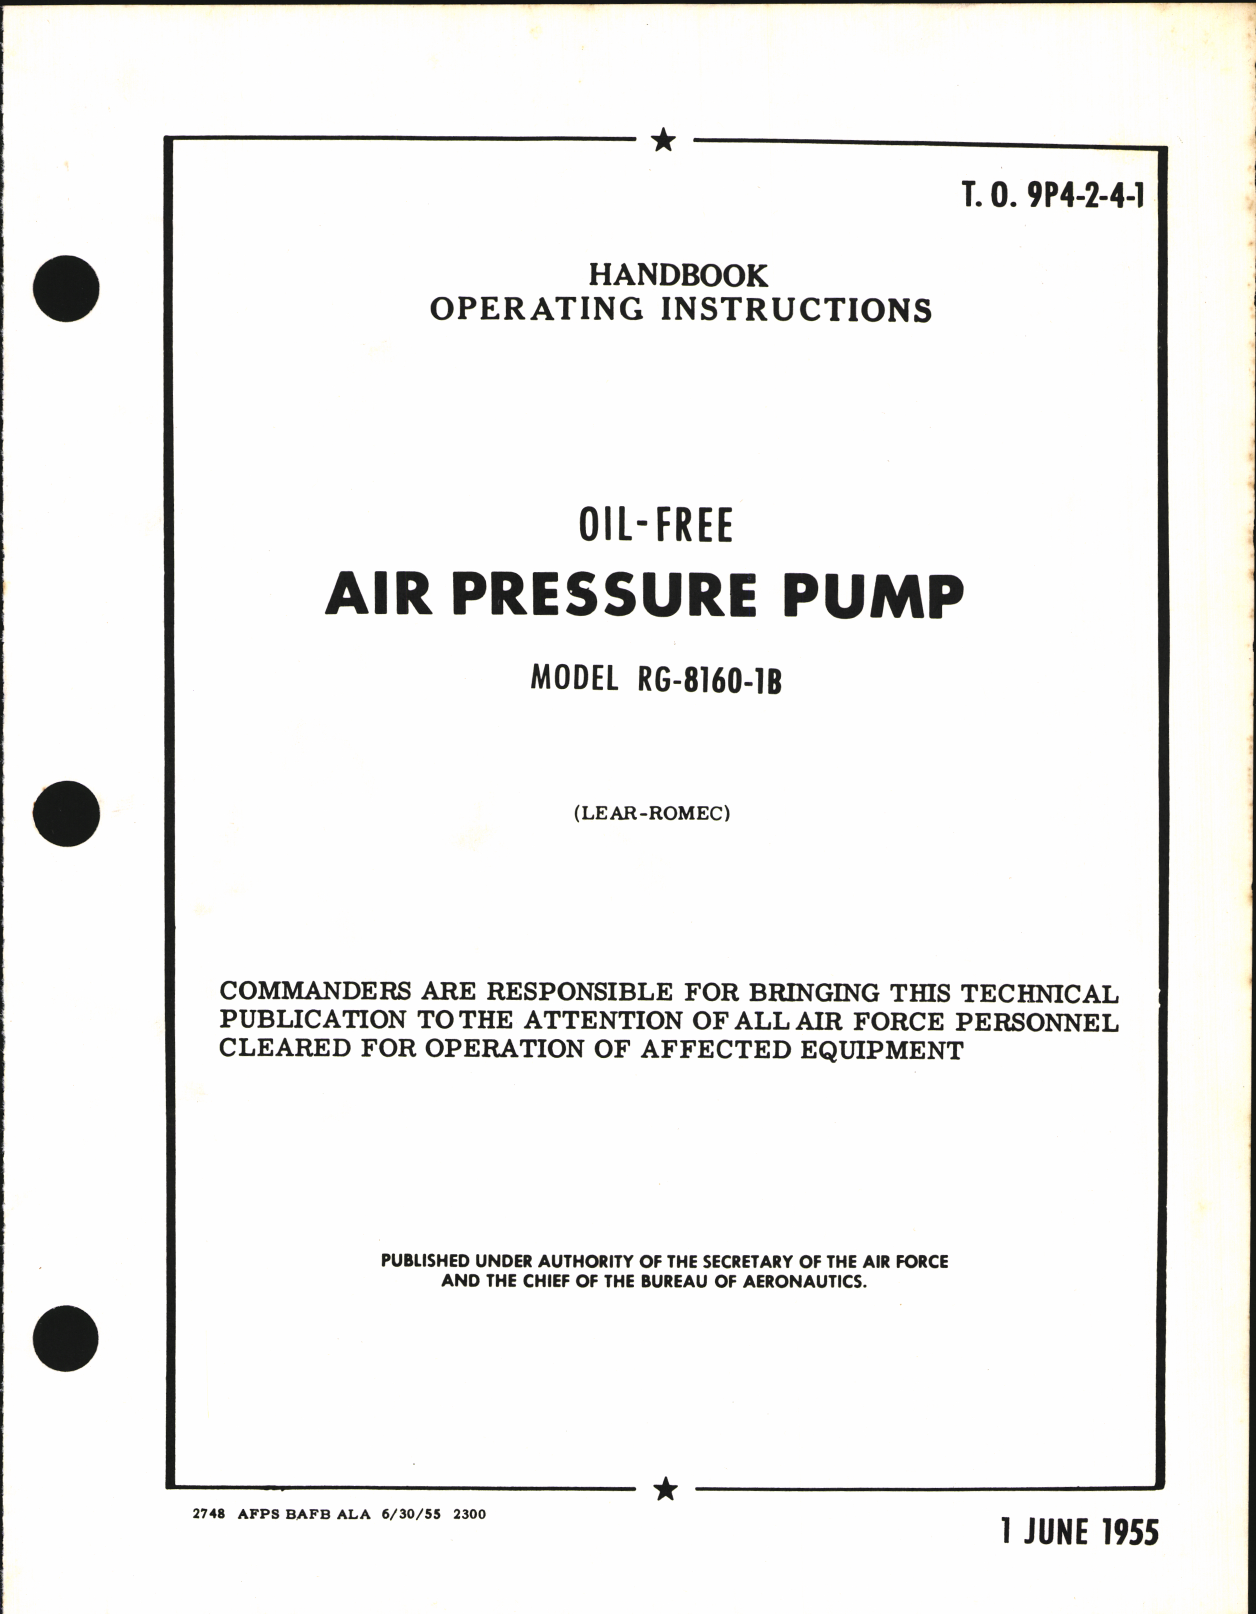 Sample page 1 from AirCorps Library document: Handbook of Operating Instructions for Oil-Free Air Pressure Pump Model RG-8160-1B